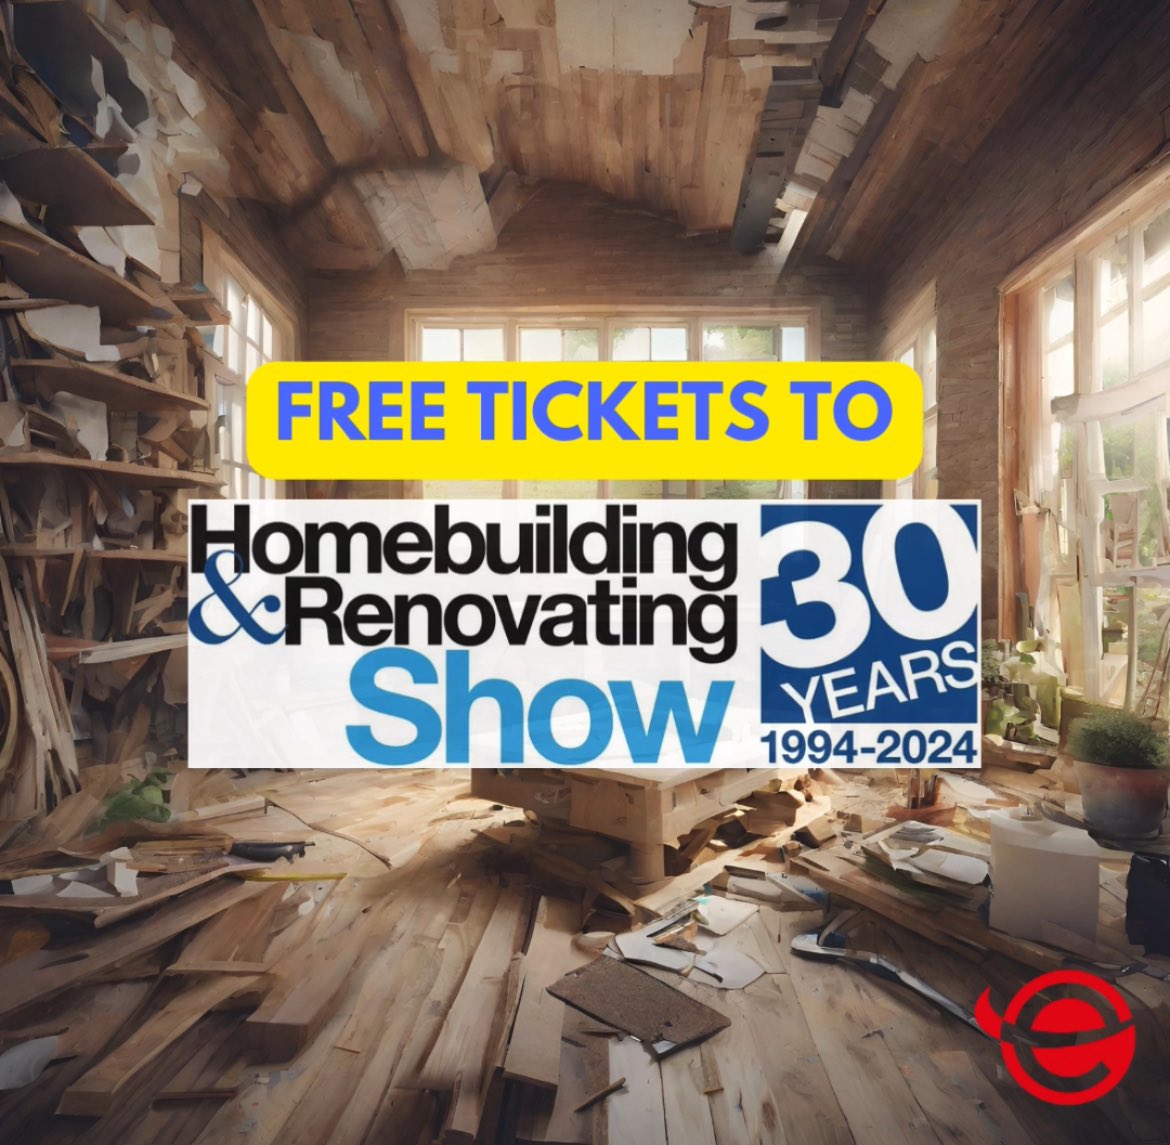 Renovating or building a home? Dreams of building your own? 🏠 Claim free tickets to the Homebuilding & Renovating Shows (worth up to £36). 🎟️🤳 Visit: homebuildingshow.co.uk/instagram-orga… #renovations #house #houserenovation #housebeautiful #building #builder #selfbuild @HBR_Show